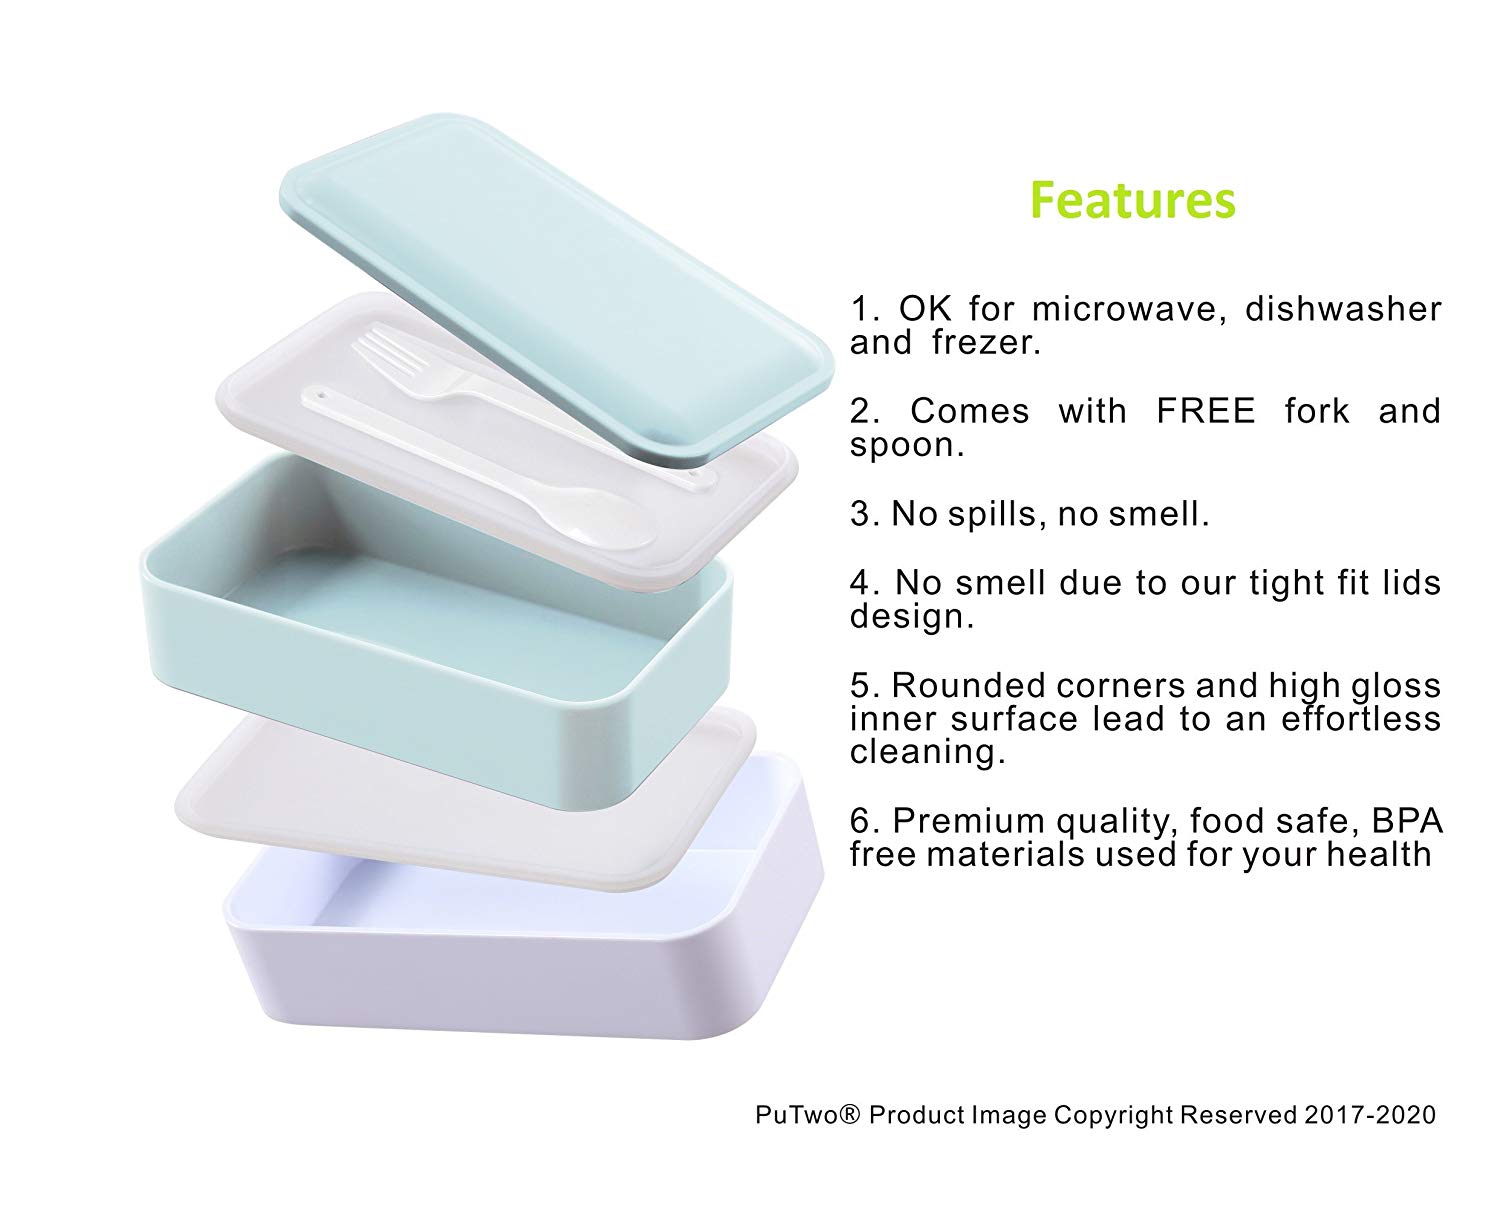 Bento Box 2 Tiers Bento Lunch Box Lunch Boxes with Reusable Cutlery Japanese Style for Microwave Freezer Dishwasher Bento Boxes for Kids Adults Work School - Pastel Blue PuTwo - image 2 of 6